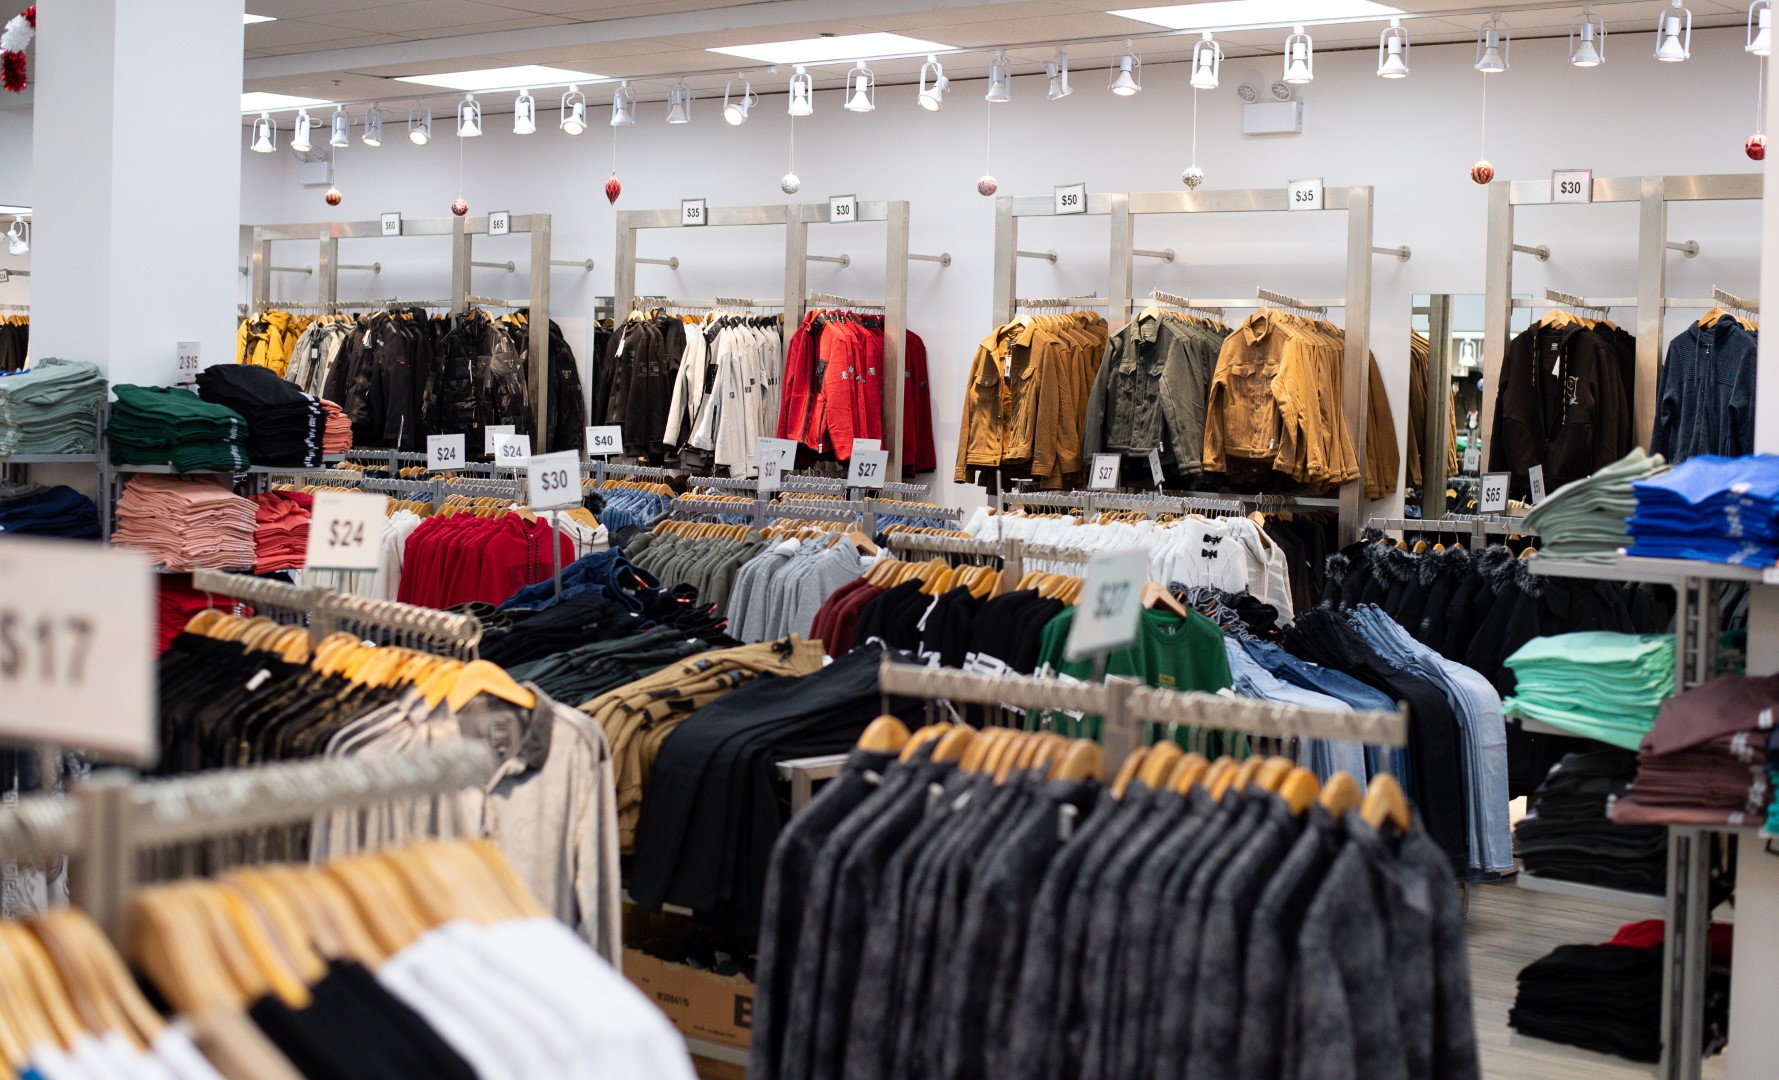 Interior of a clothing store with racks and shelves filled with various garments like jeans and jackets, prices displayed on signs, and soft lighting overhead.